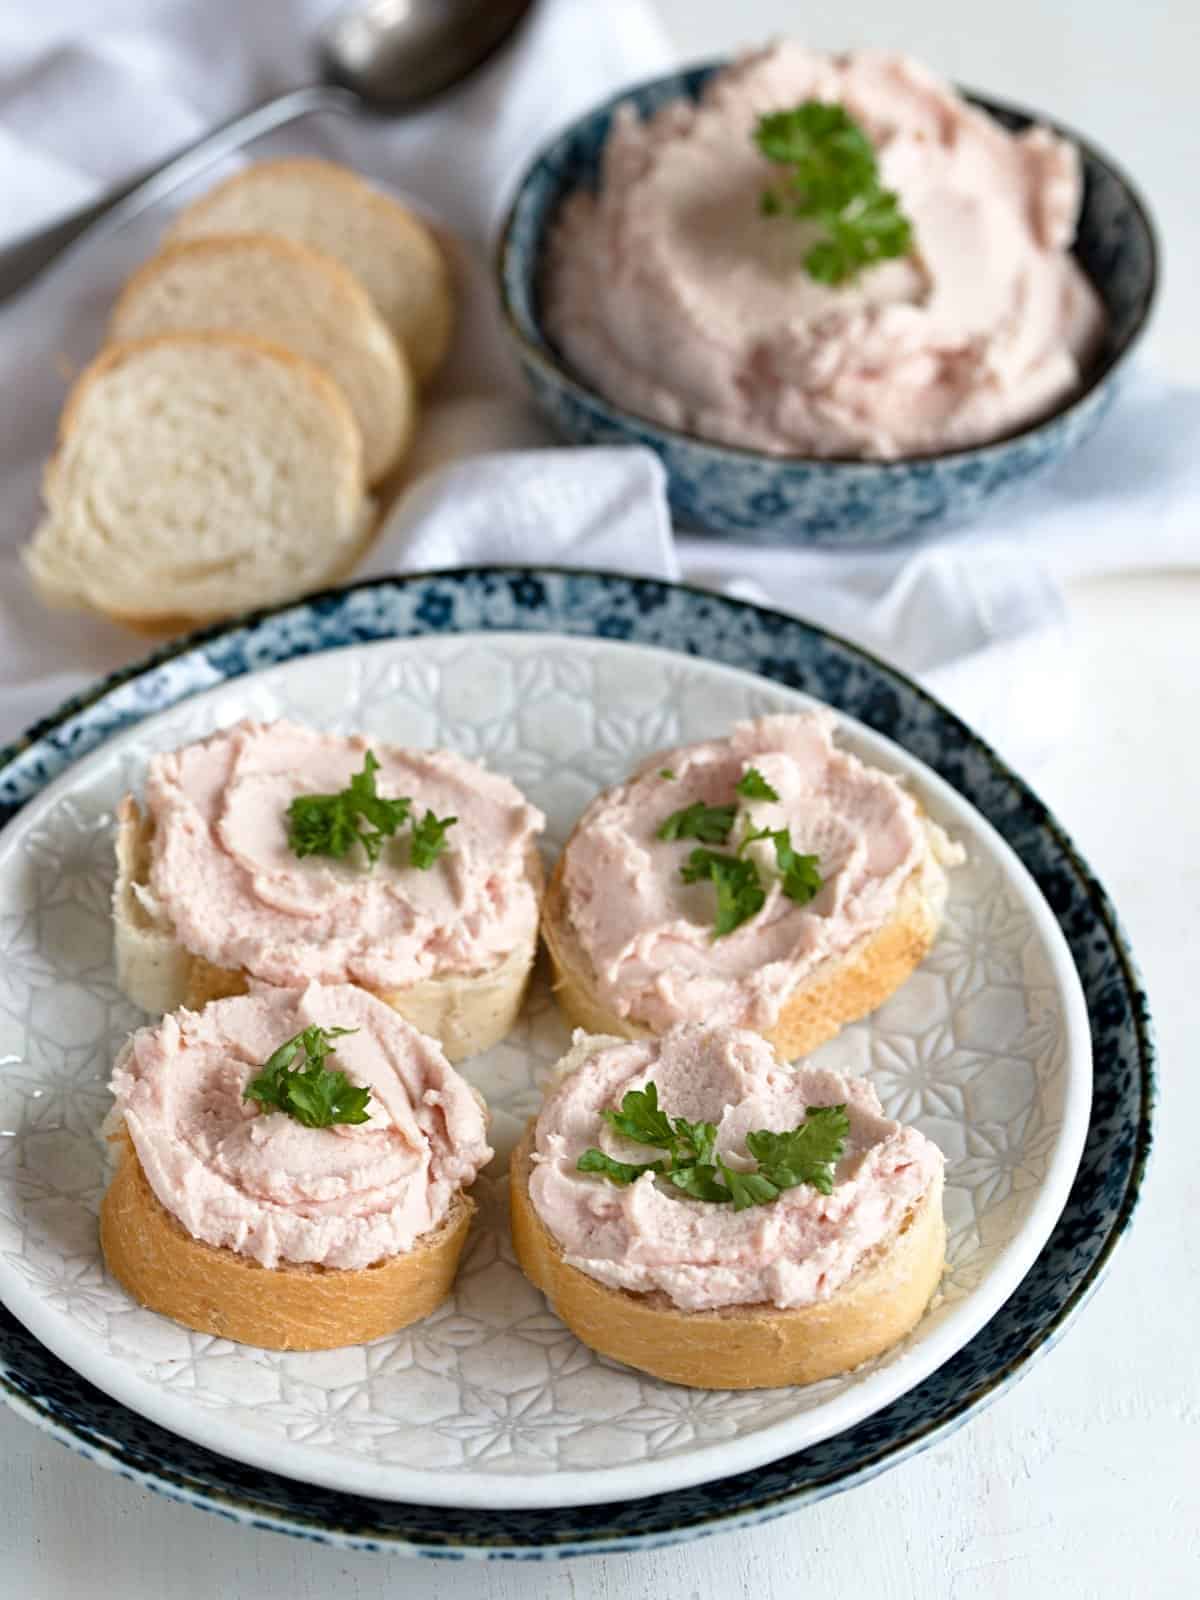 Ham spread on white bread slices, garnished with green parsley. 